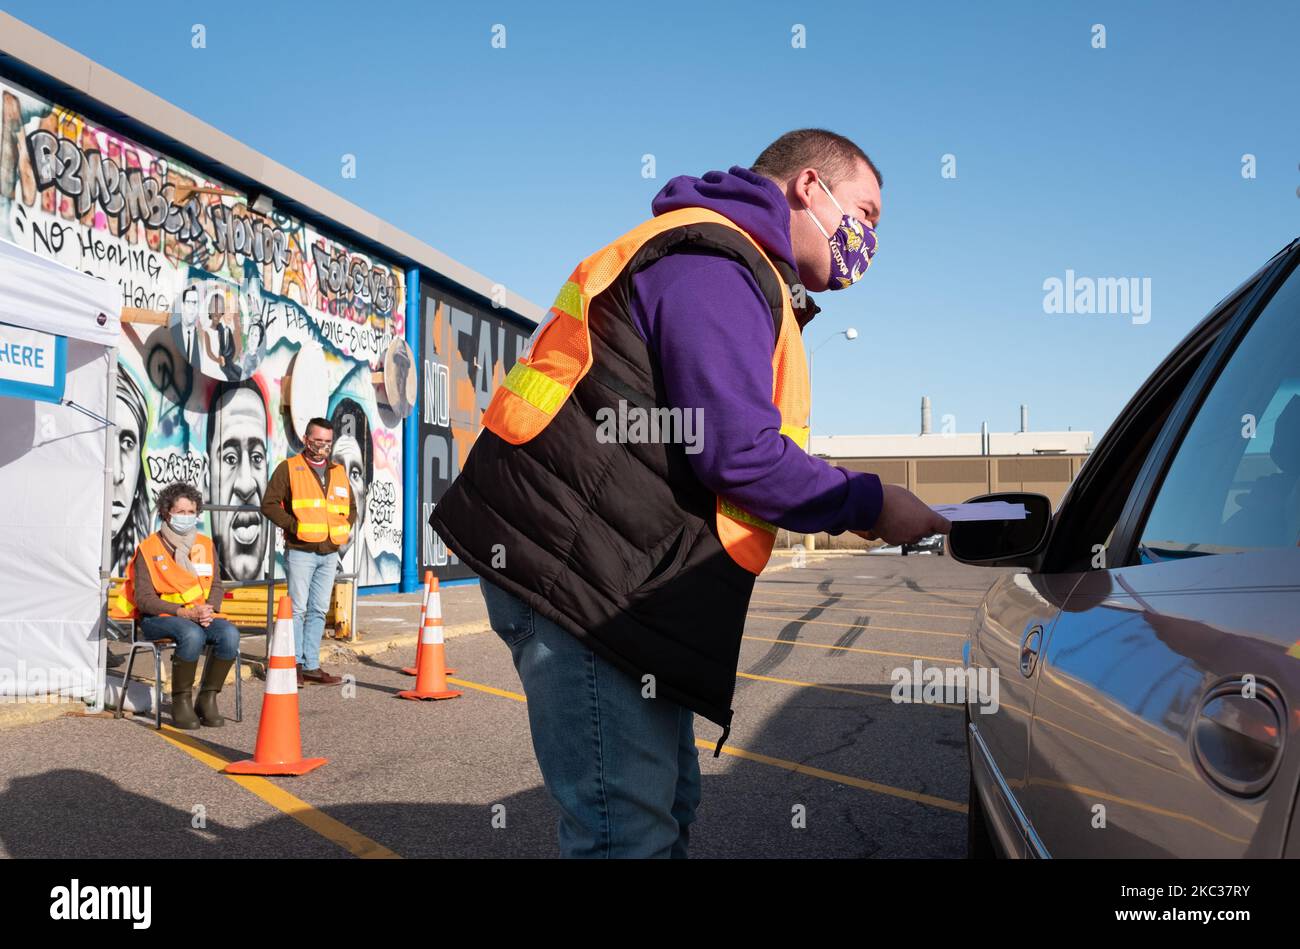 A poll worker accepts a ballot at a drop-off location in south Minneapolis, in Minneapolis, United States on November 2, 2020. As with cities across the United States, Minneapolis saw high a turnout on November 2 for early voting in this year's general election. Both ballot drop-off locations as well as in-person voting centers around the city were busy, with some locations experiencing lines that were blocks long. (Photo by Tim Evans/NurPhoto) Stock Photo